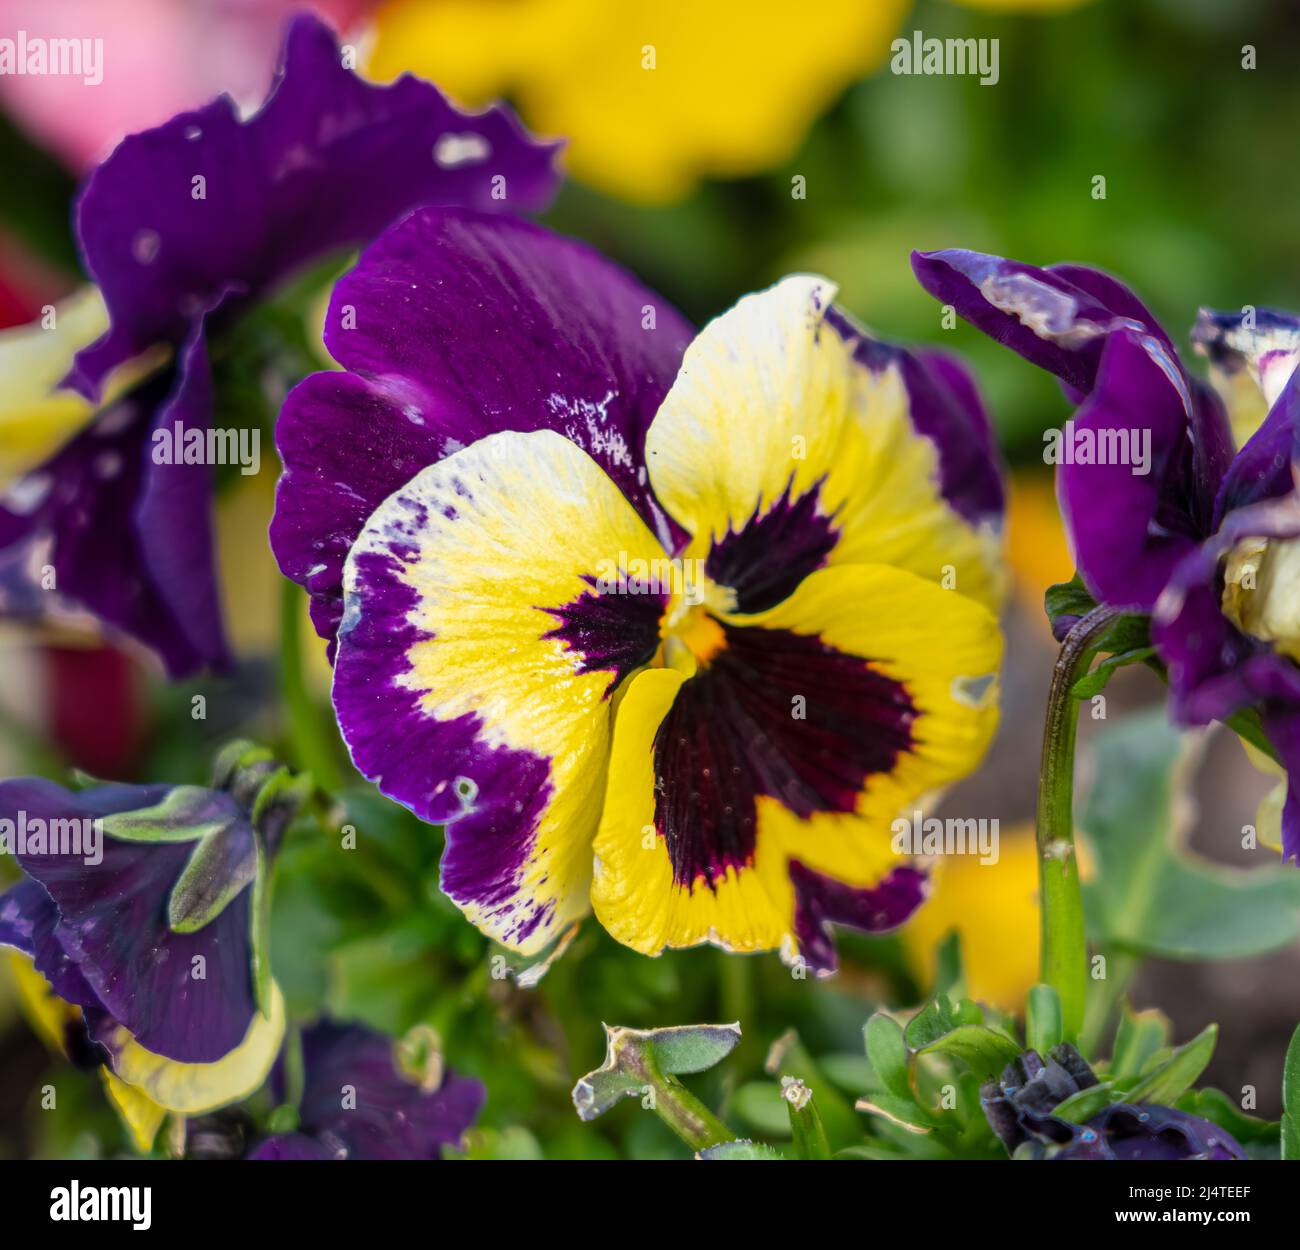 close up of a beautiful spring flowering yellow Pansies (Viola tricolor var. hortensis) Stock Photo